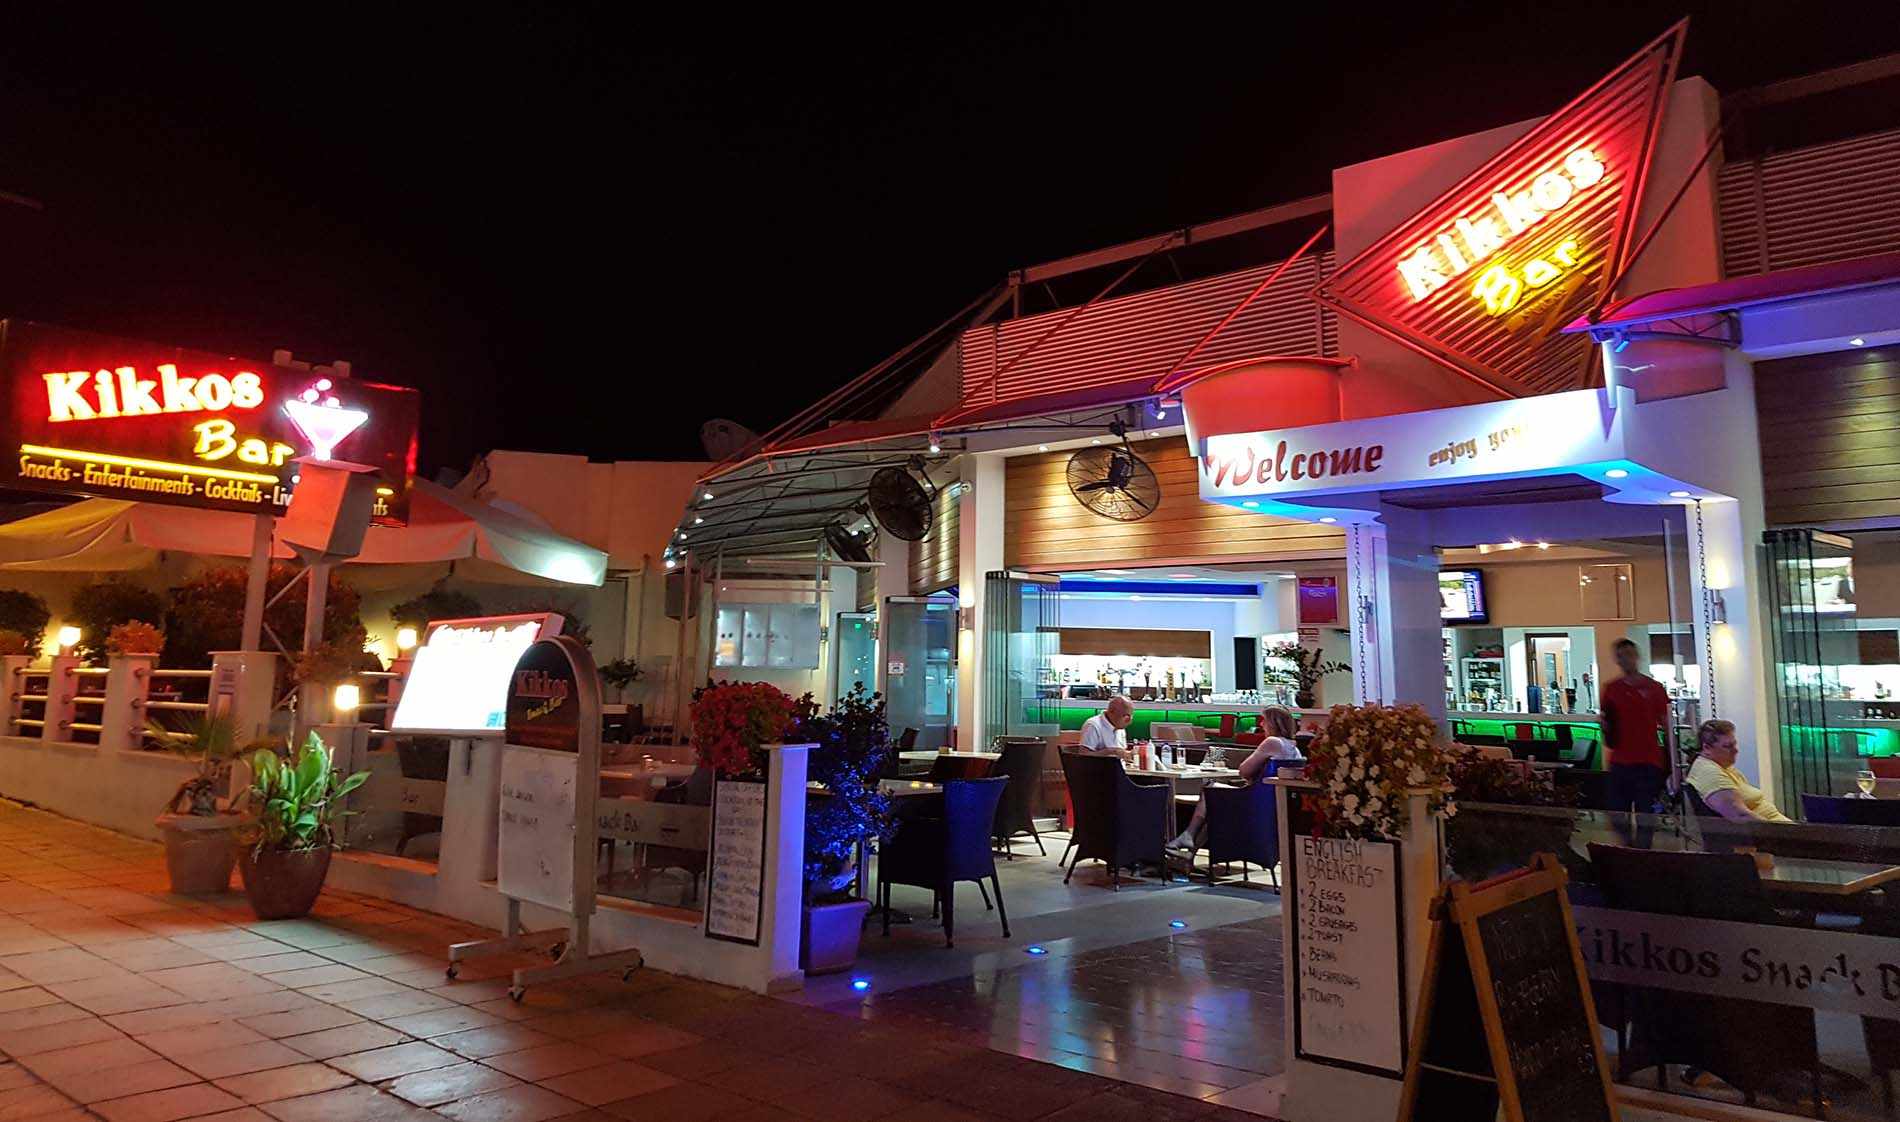 Interview with the owner of Kikkos Bar in Pafos